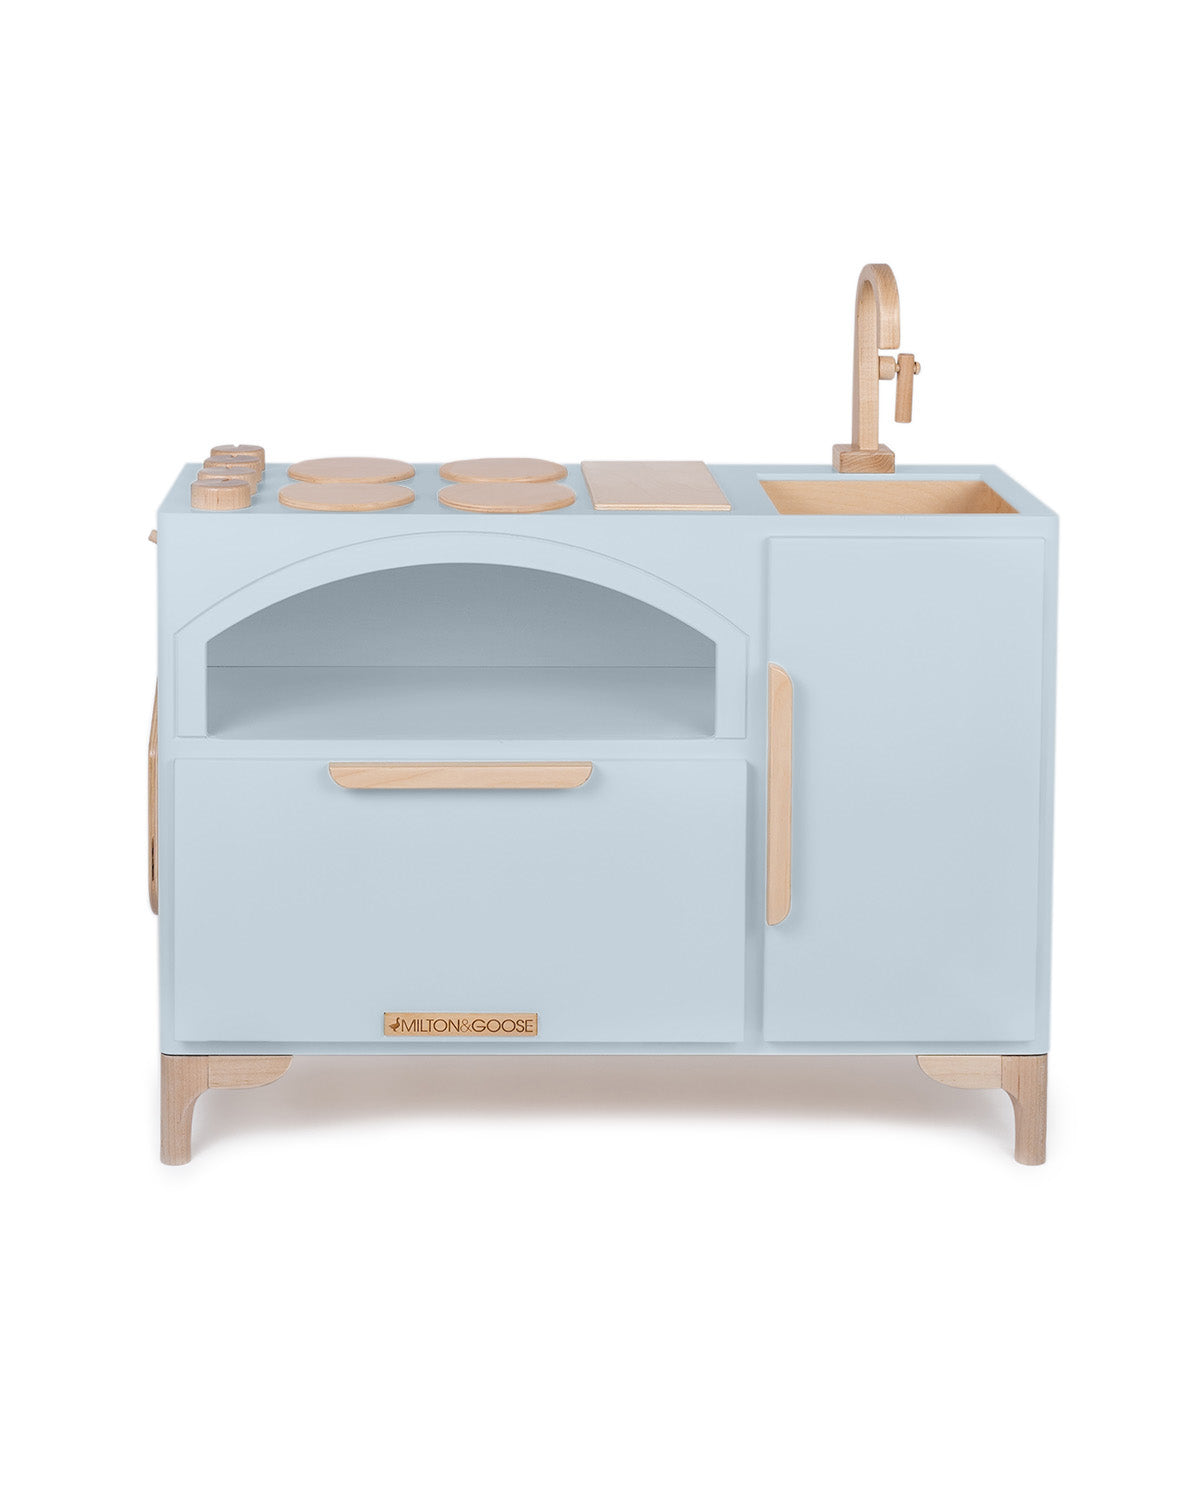 Milton & Goose's Luca Play Kitchen in gray featuring a pizza oven and coordinating pizza paddle,.